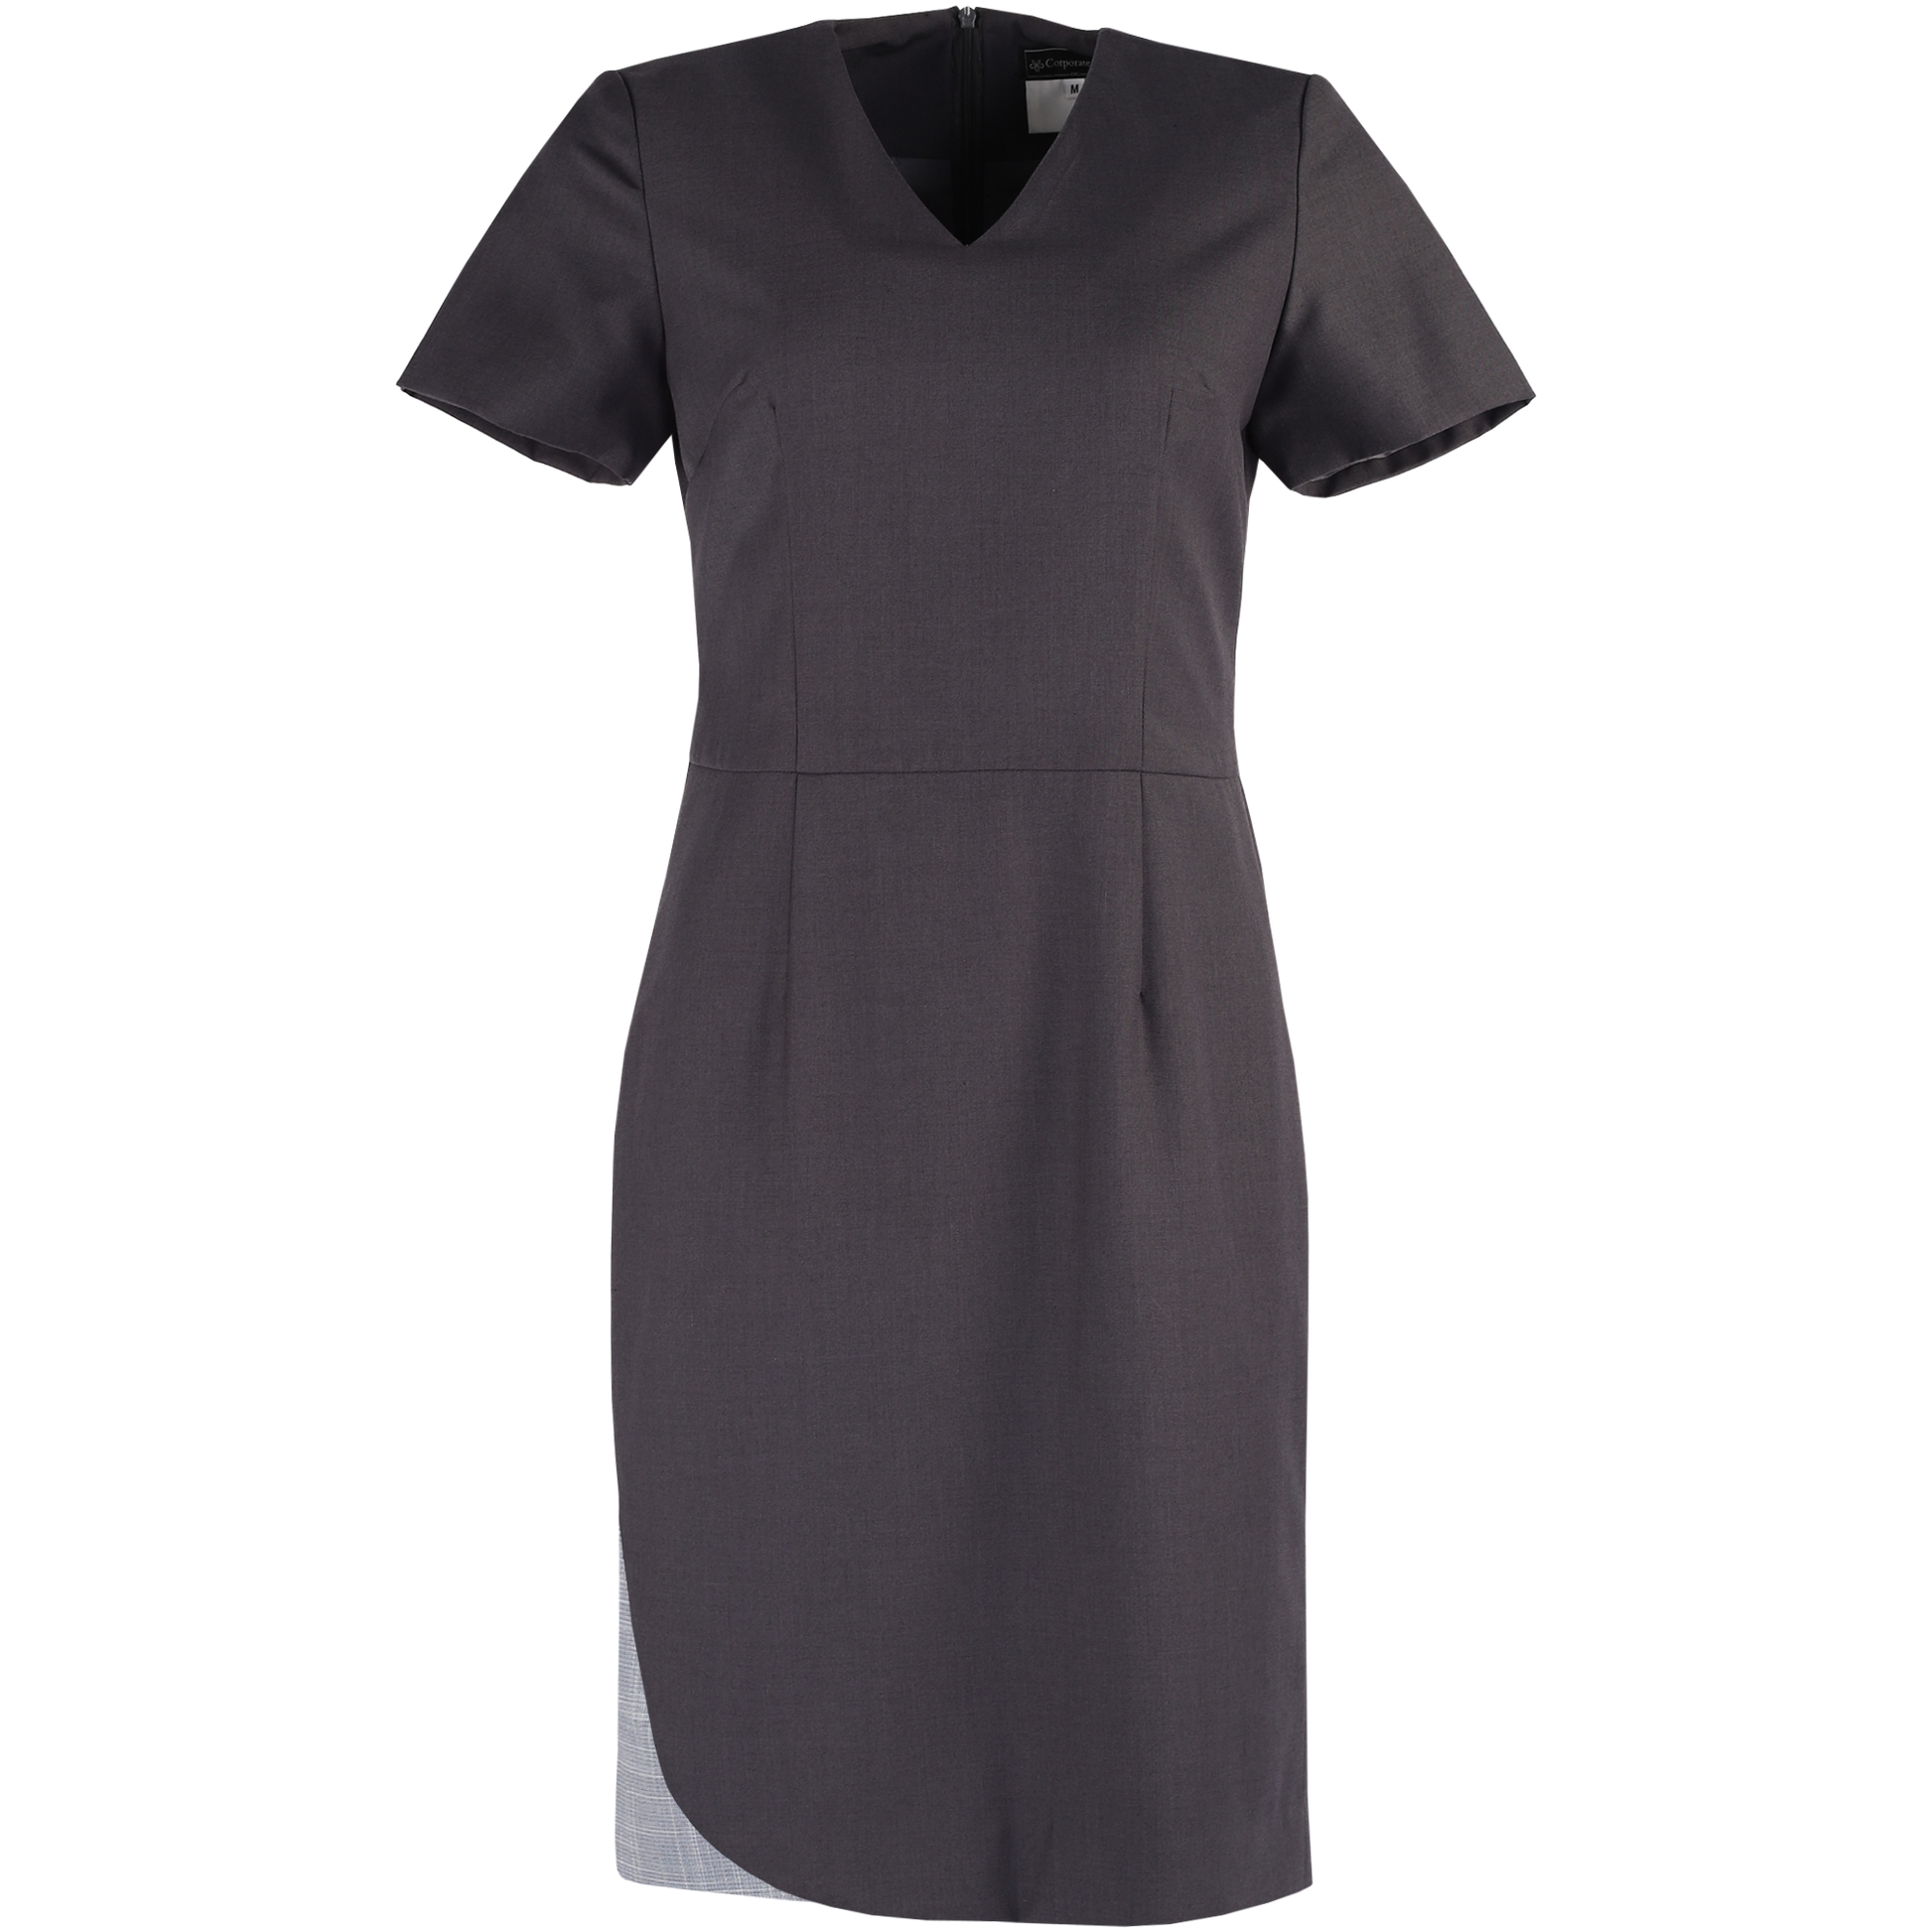 Charcoal V-Neck Dress with Trims, Uniform by CYC